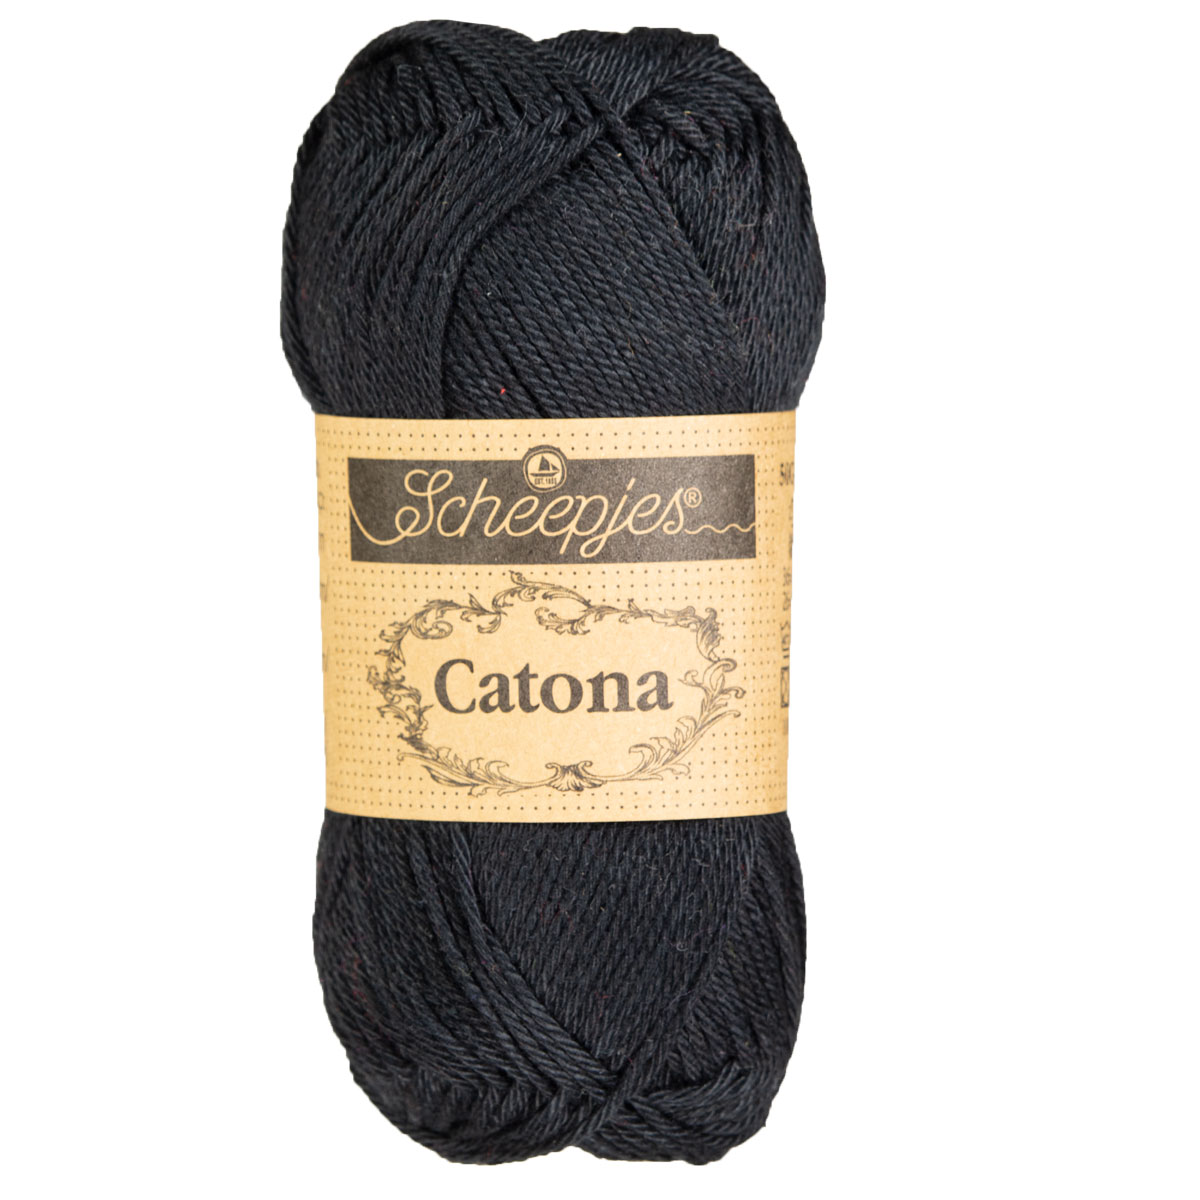 Scheepjes Catona ~ A Yarn Review - Crystalized Designs